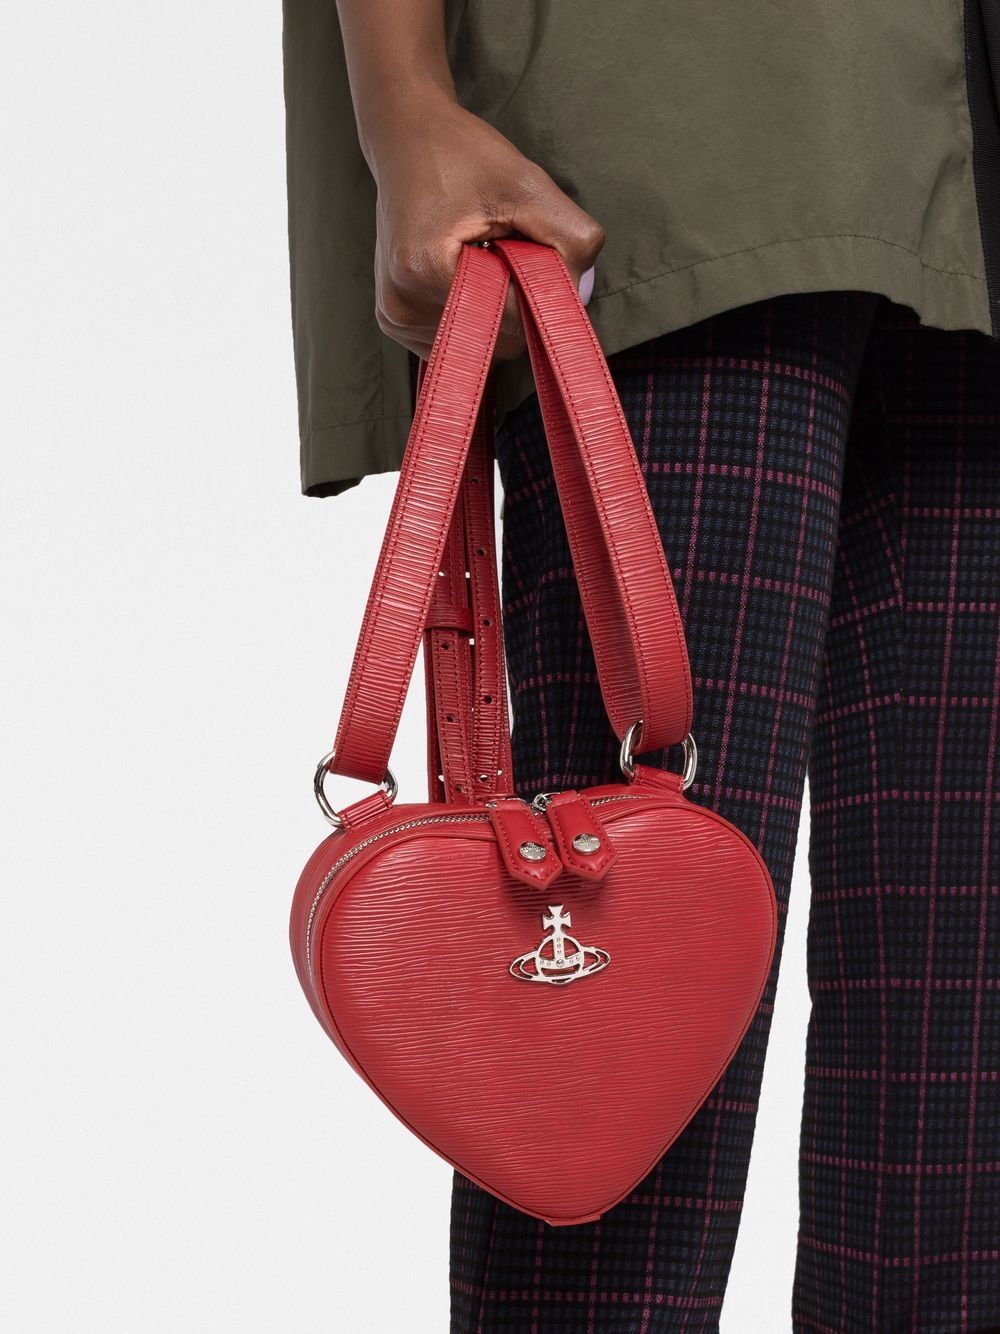 New Vivienne Westwood heart shaped bags!